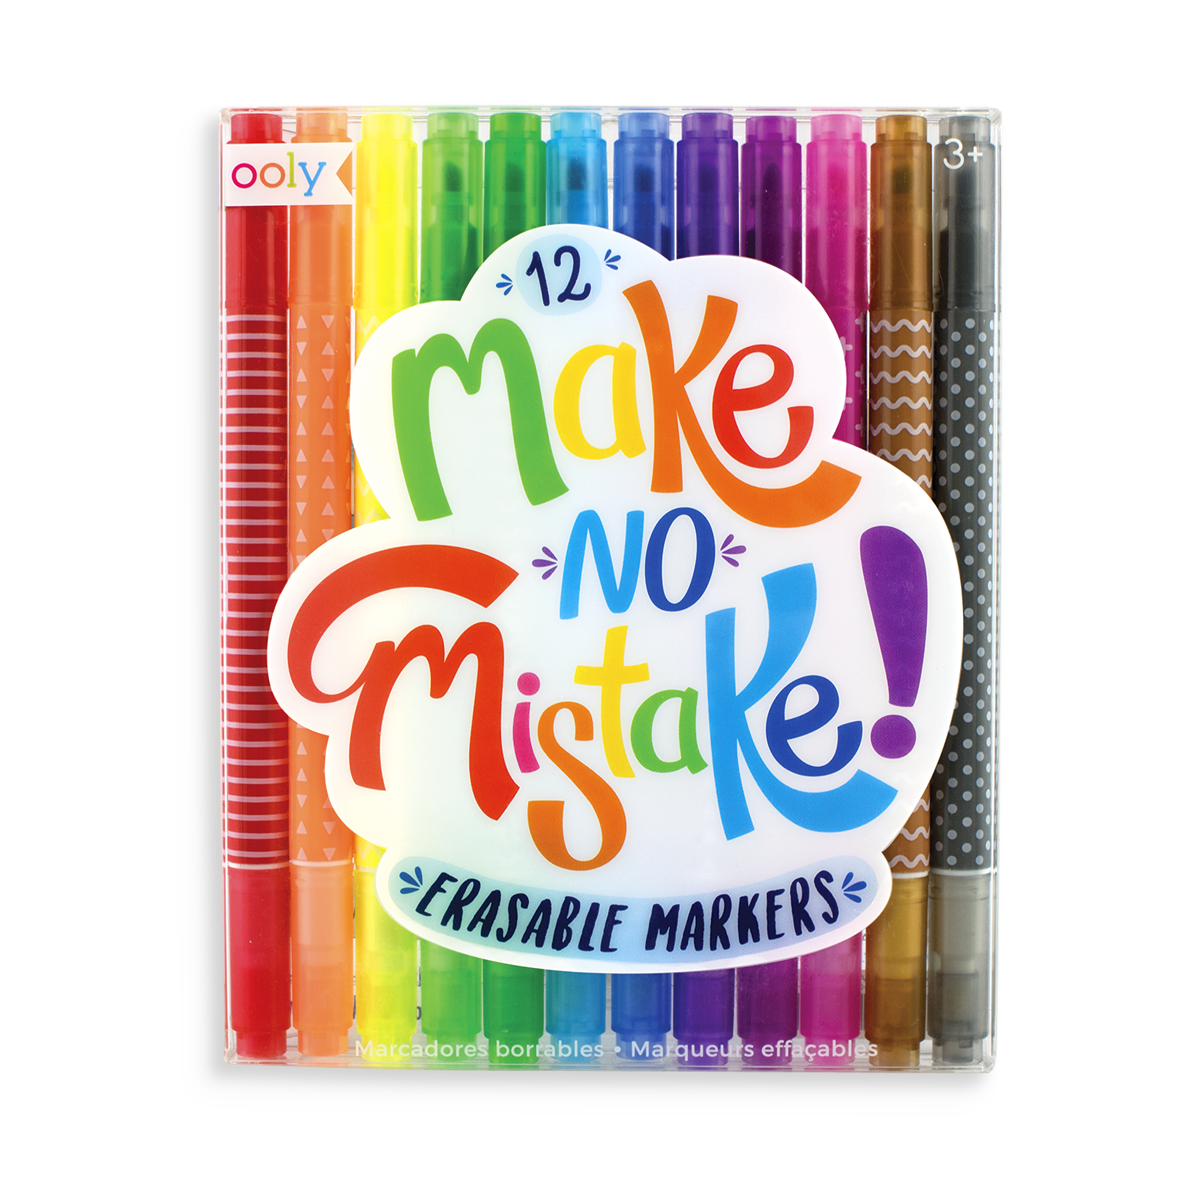 https://cdn.shopify.com/s/files/1/0556/0519/8922/products/130-046-Make-No-Mistake-Erasable-Markers-B1.png?v=1647354187&width=1200